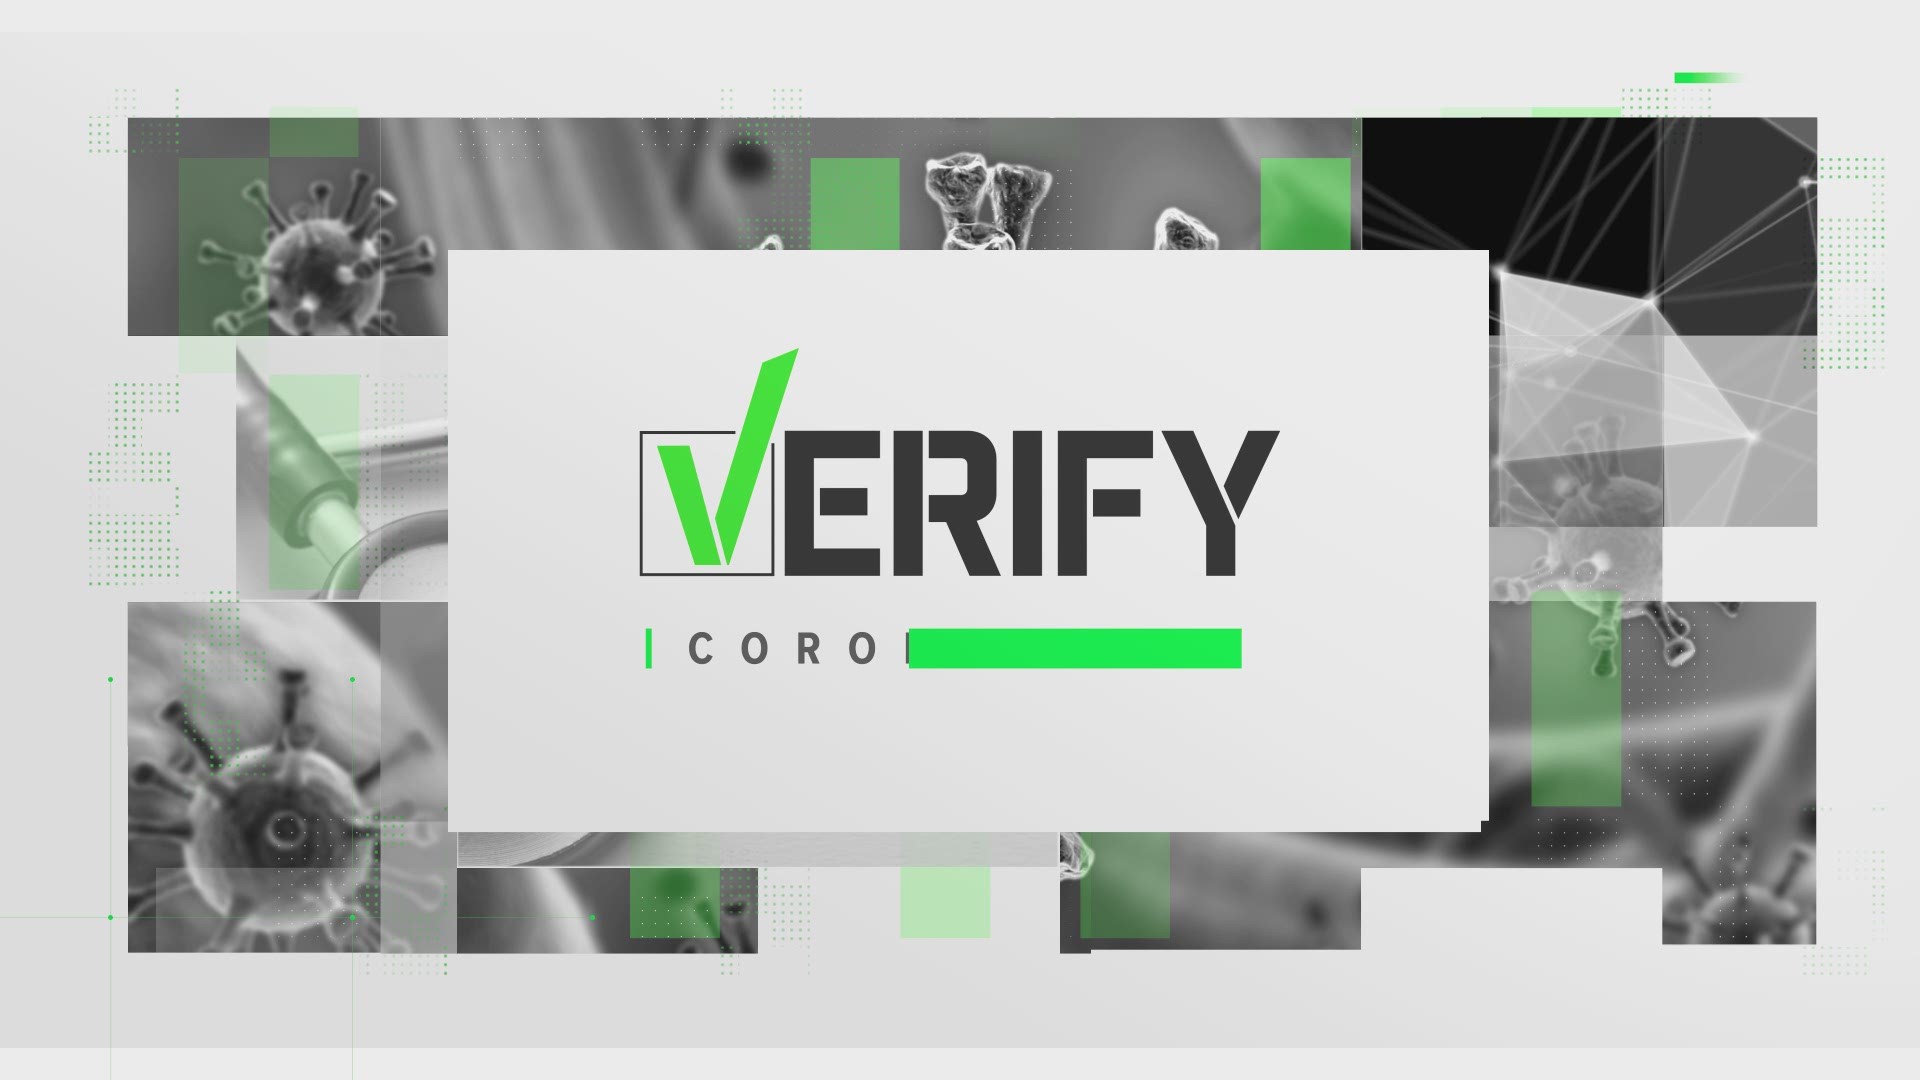 The VERIFY Team spoke with infectious diseases experts about whether it's safe to exercise after getting the vaccine.